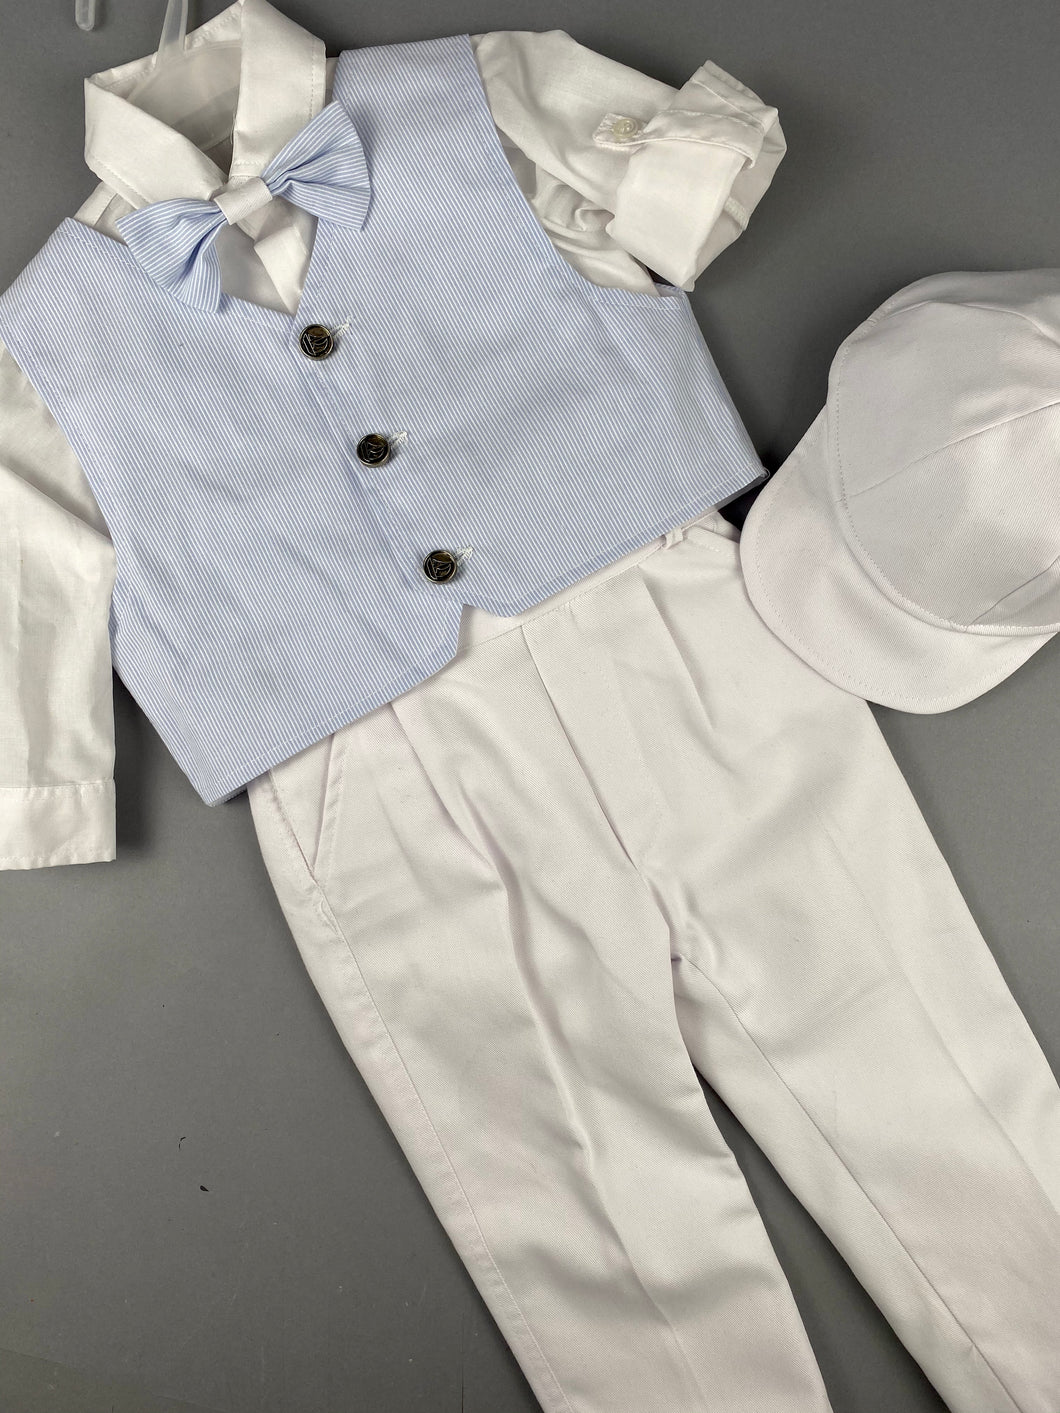 Rosies Collections 7pc full suit, Dress shirt with cuff sleeves, White Pants, Baby Blue Pinstripe Jacket, Belt or Suspenders, Cap. Made in Greece exclusively for Rosies Collections S20196